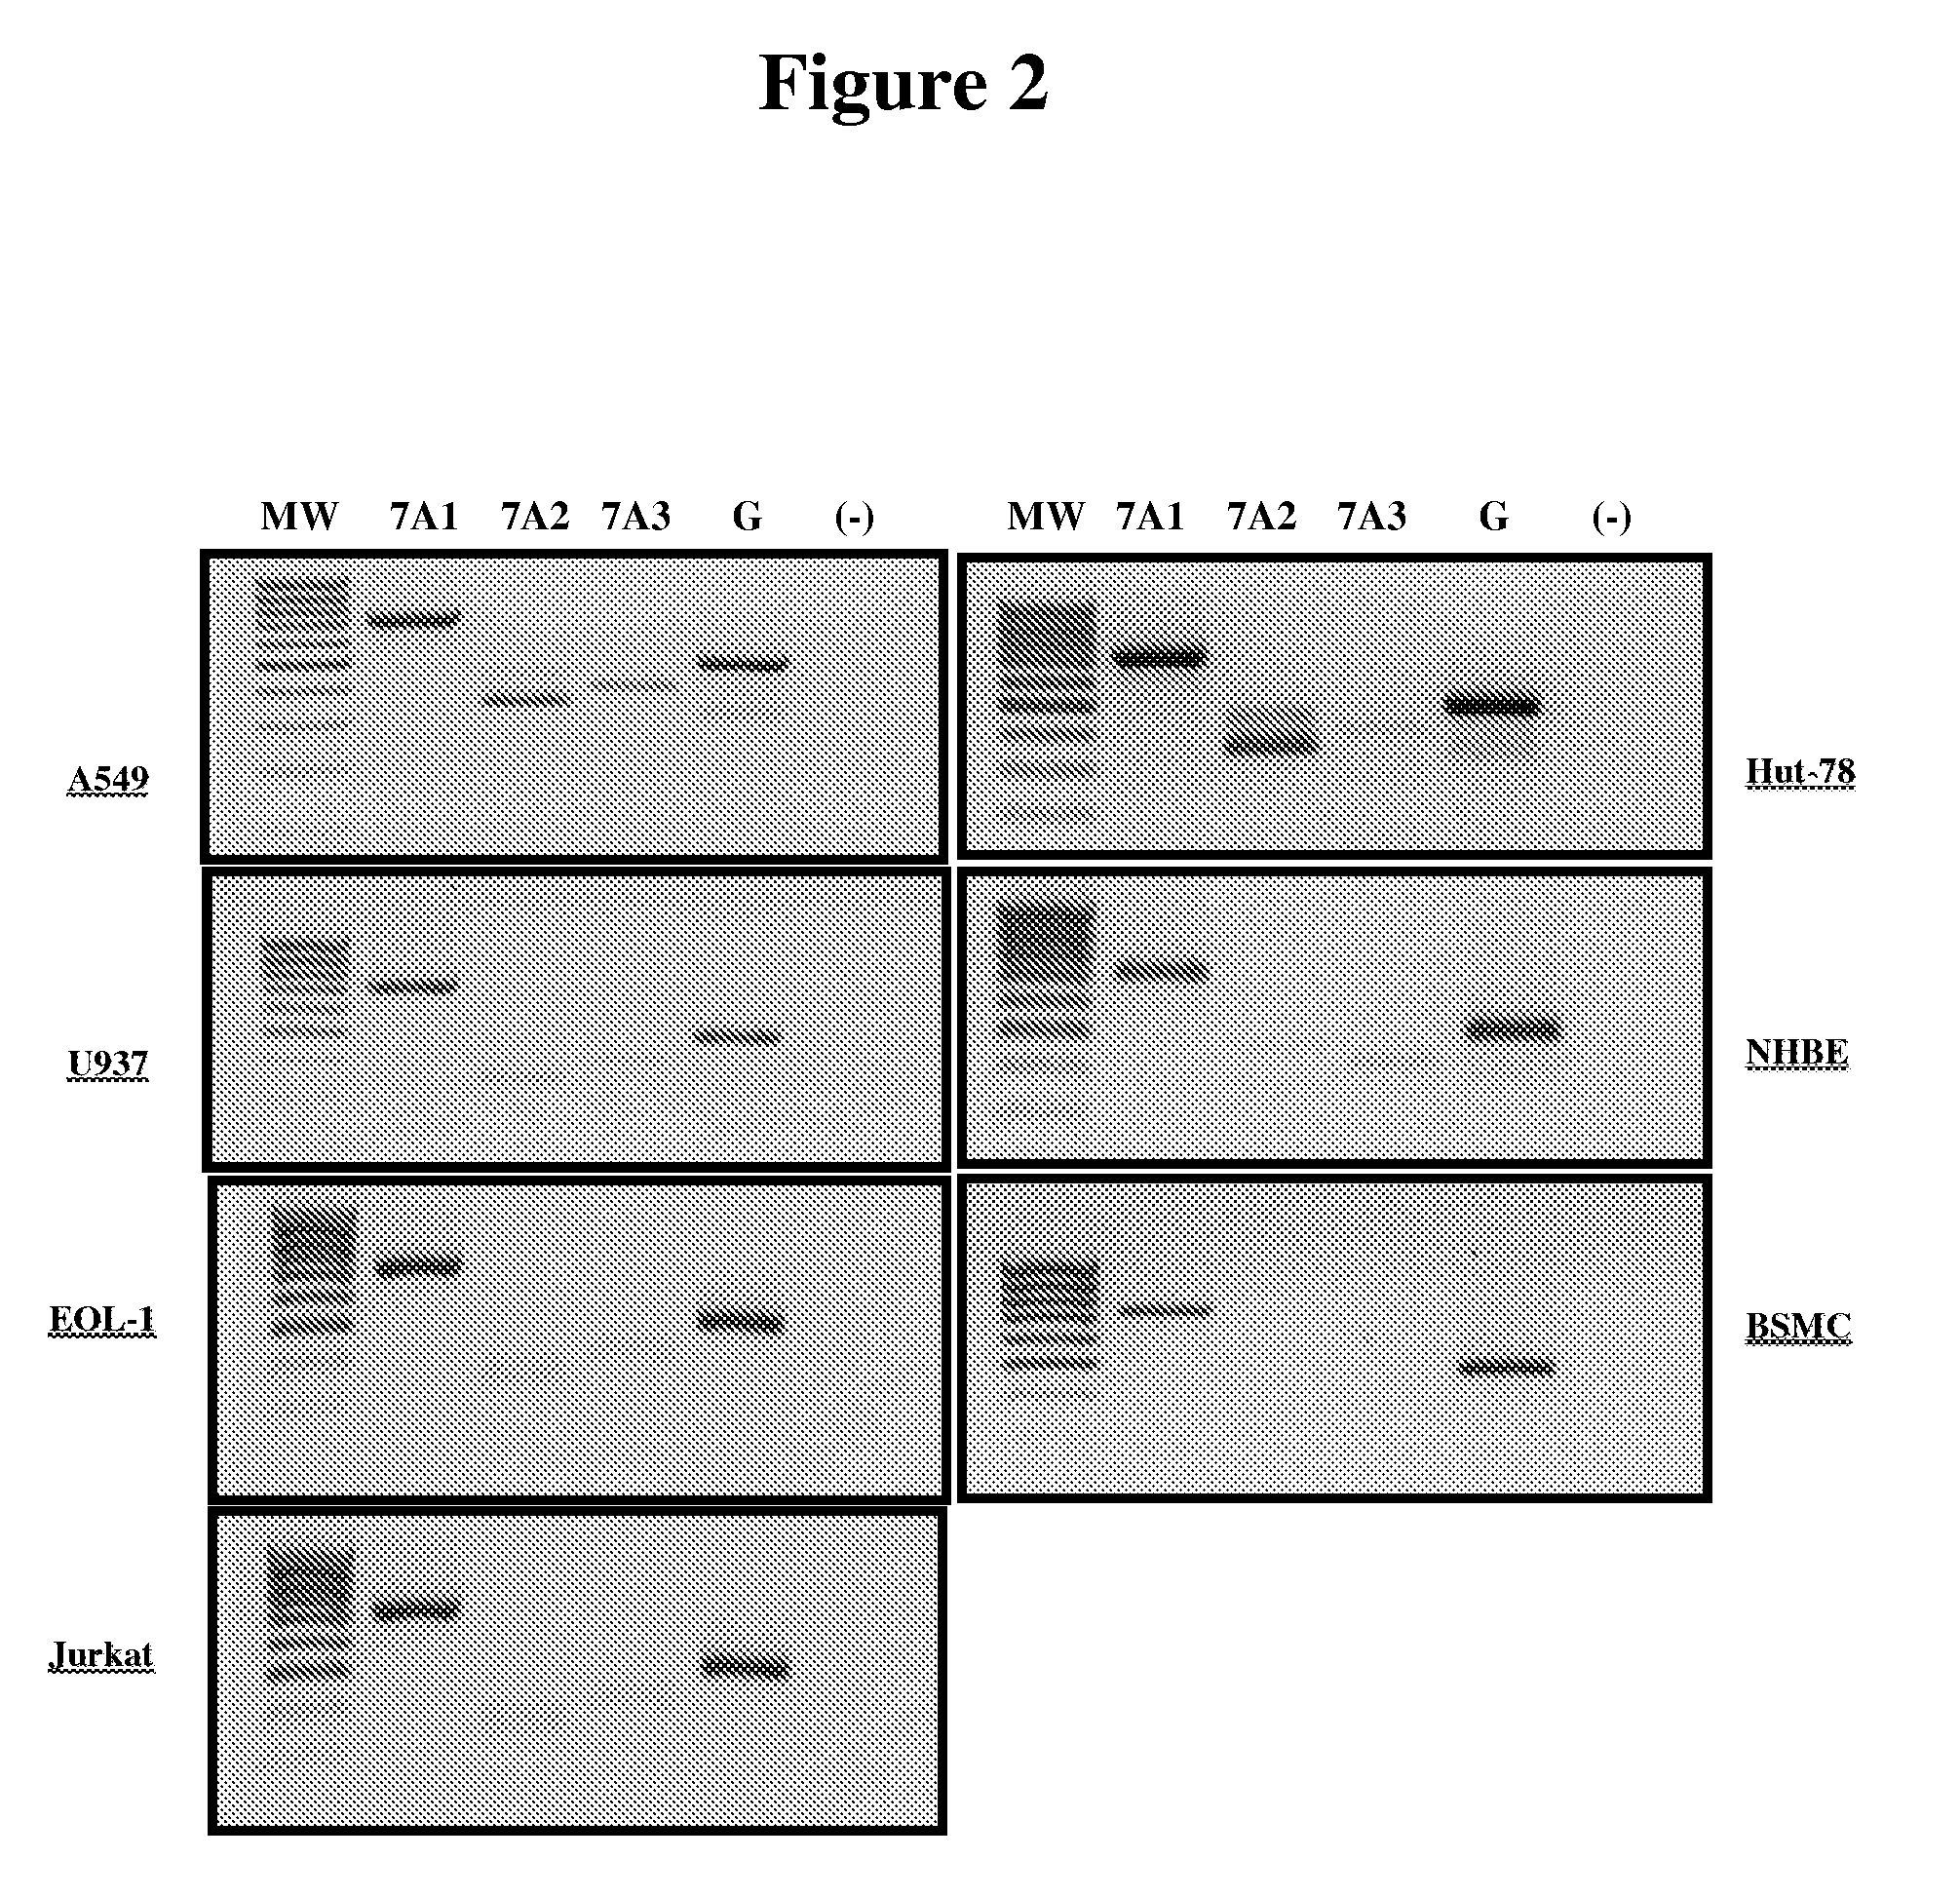 Oligonucleotide compositions and methods for treating disease including inflammatory conditions